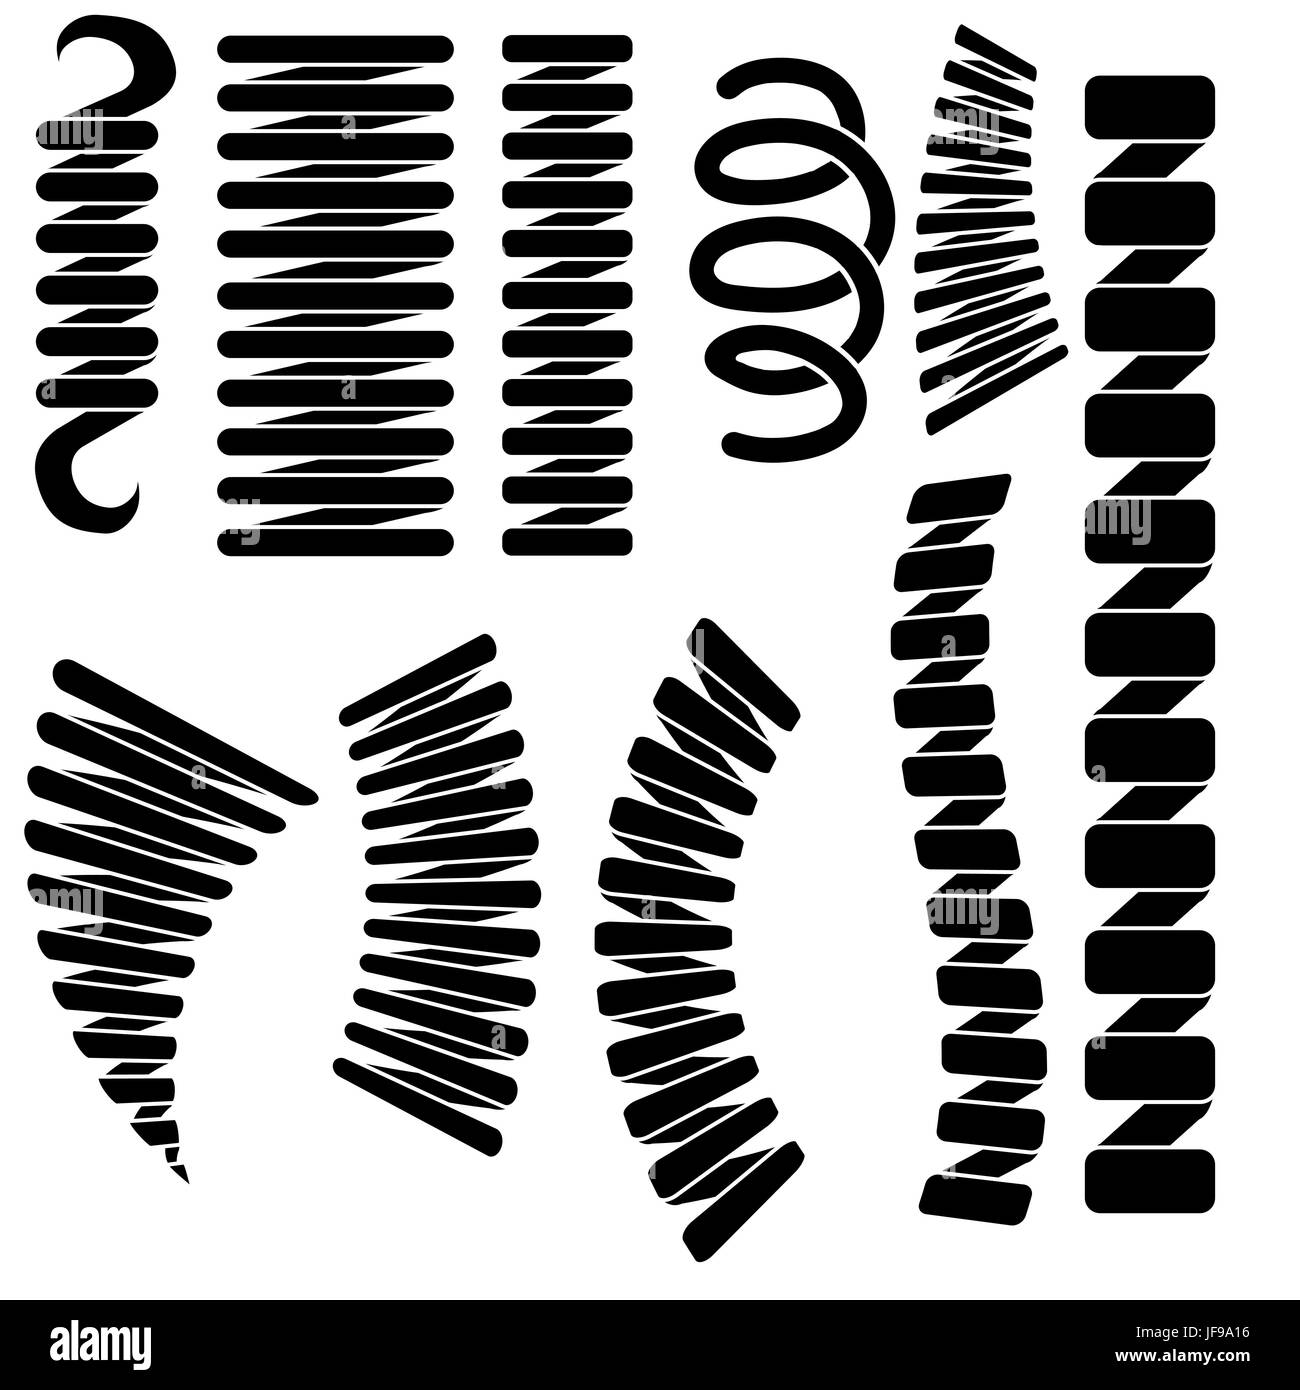 Set of Springs Silhouettes  Isolated on White Background Stock Vector